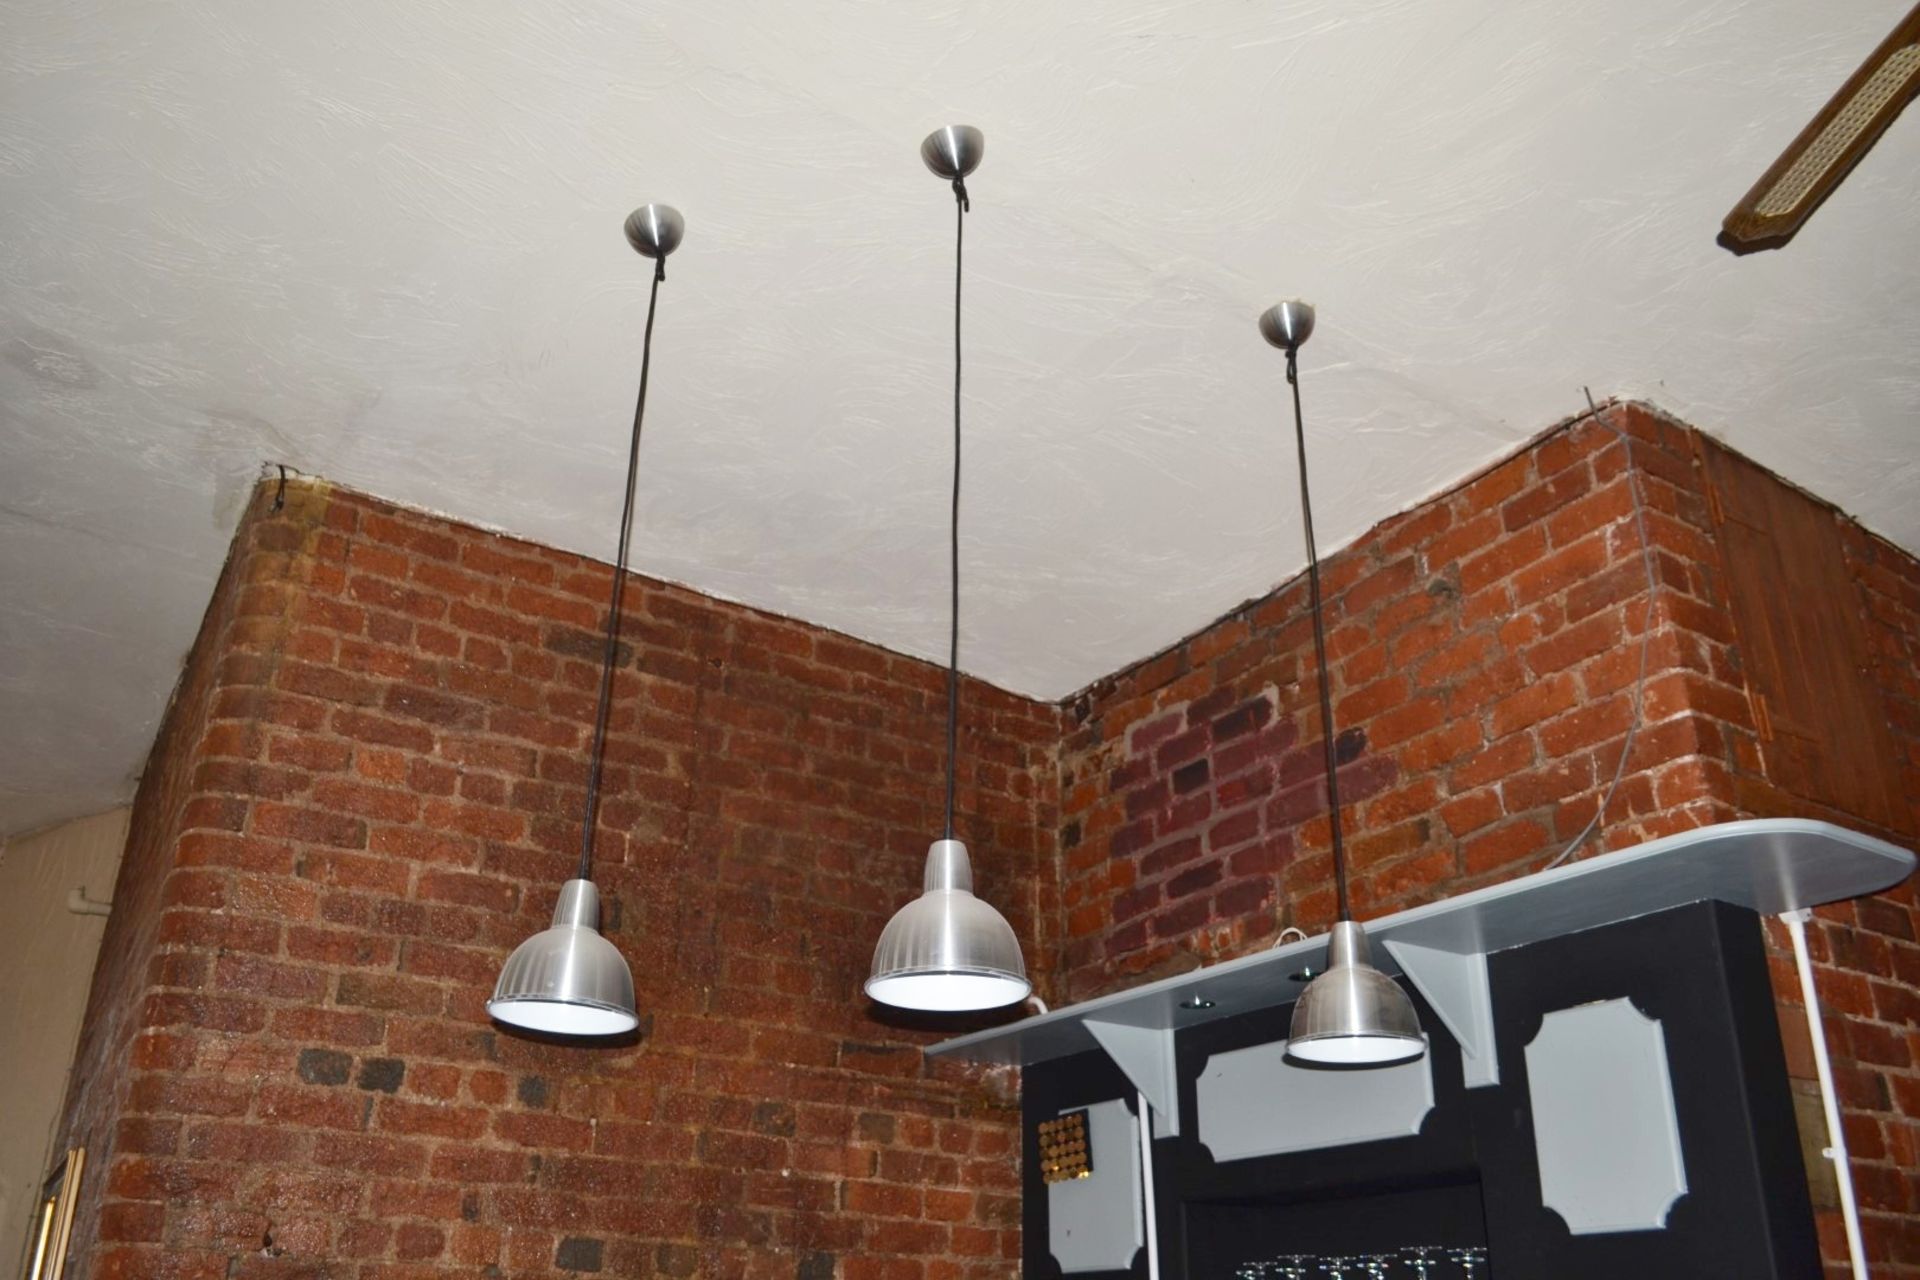 1 x Drinks Bar Finished in Black and Grey - Includes Backbar Shelf Unit and Three Pendant Lights - - Image 6 of 10